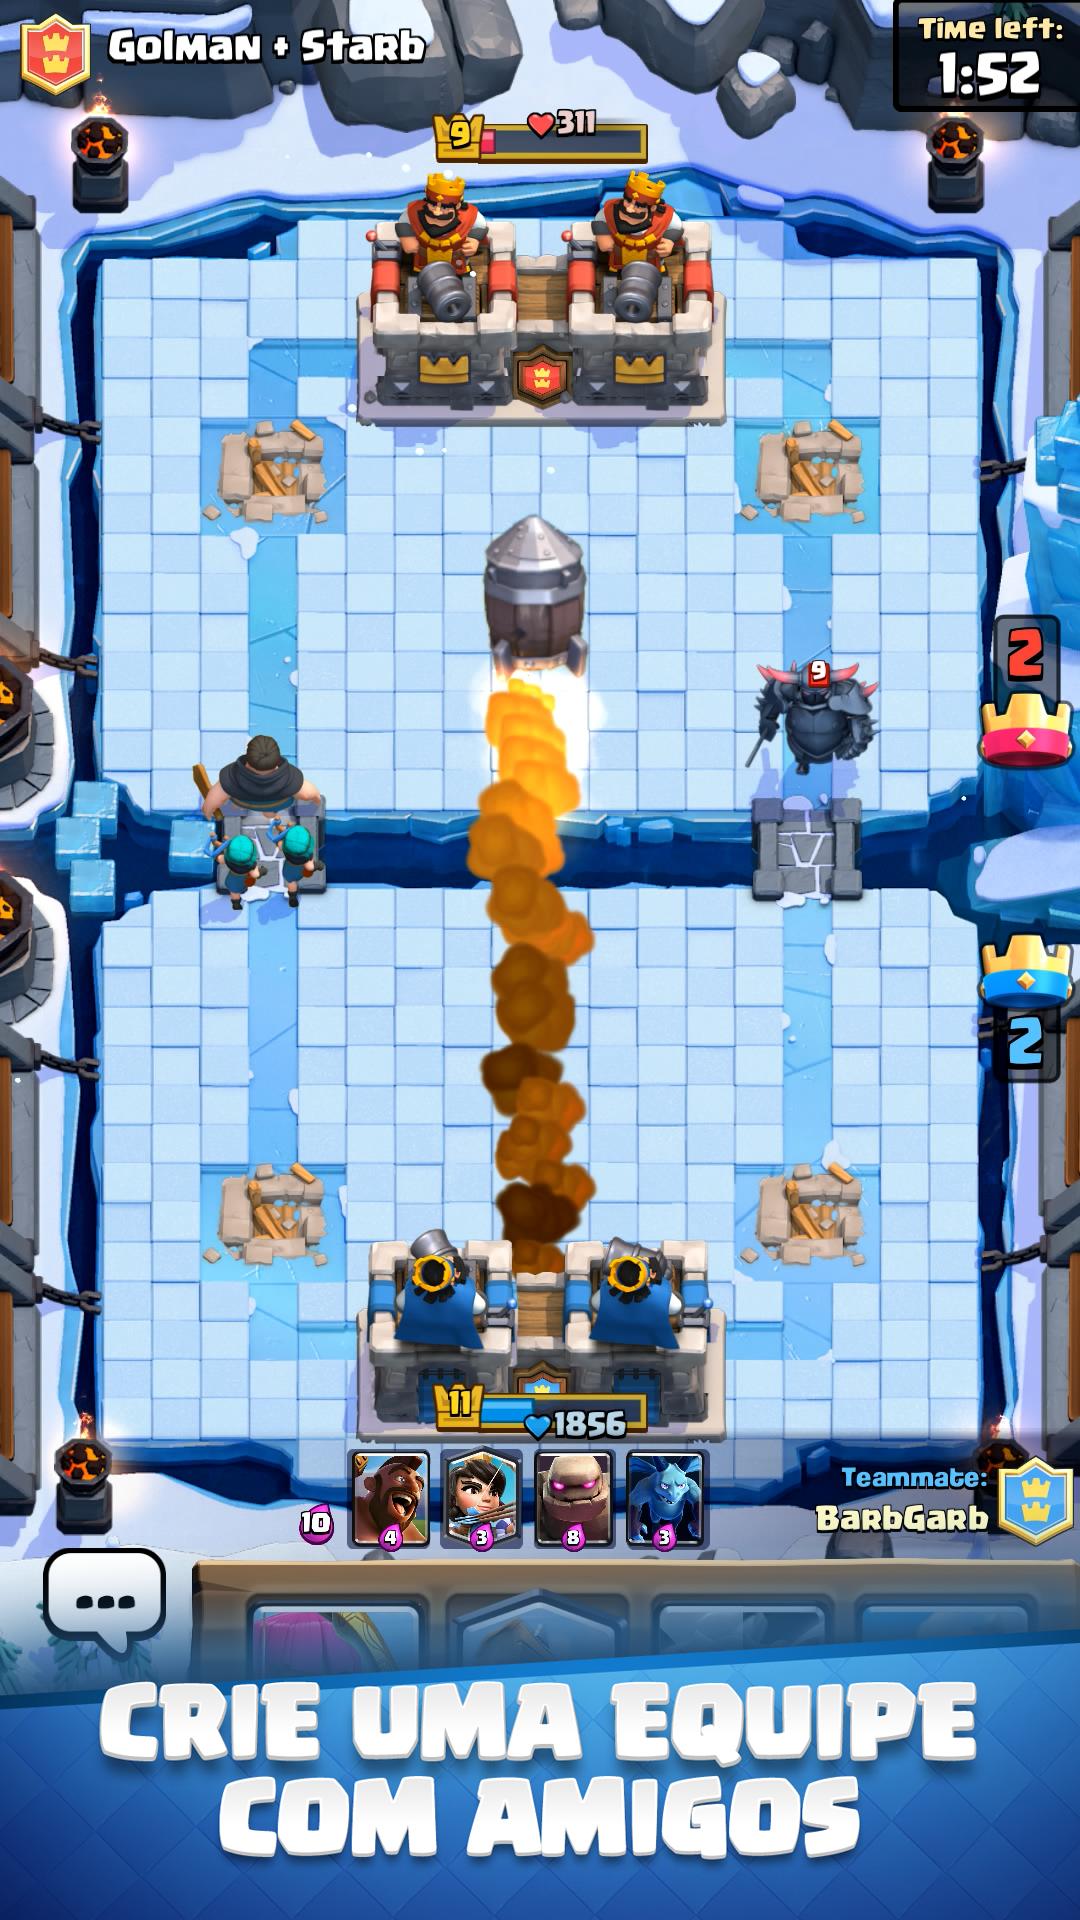 Clash Royale real time strategy card game from Supercell APK 2.9.0 ... - 